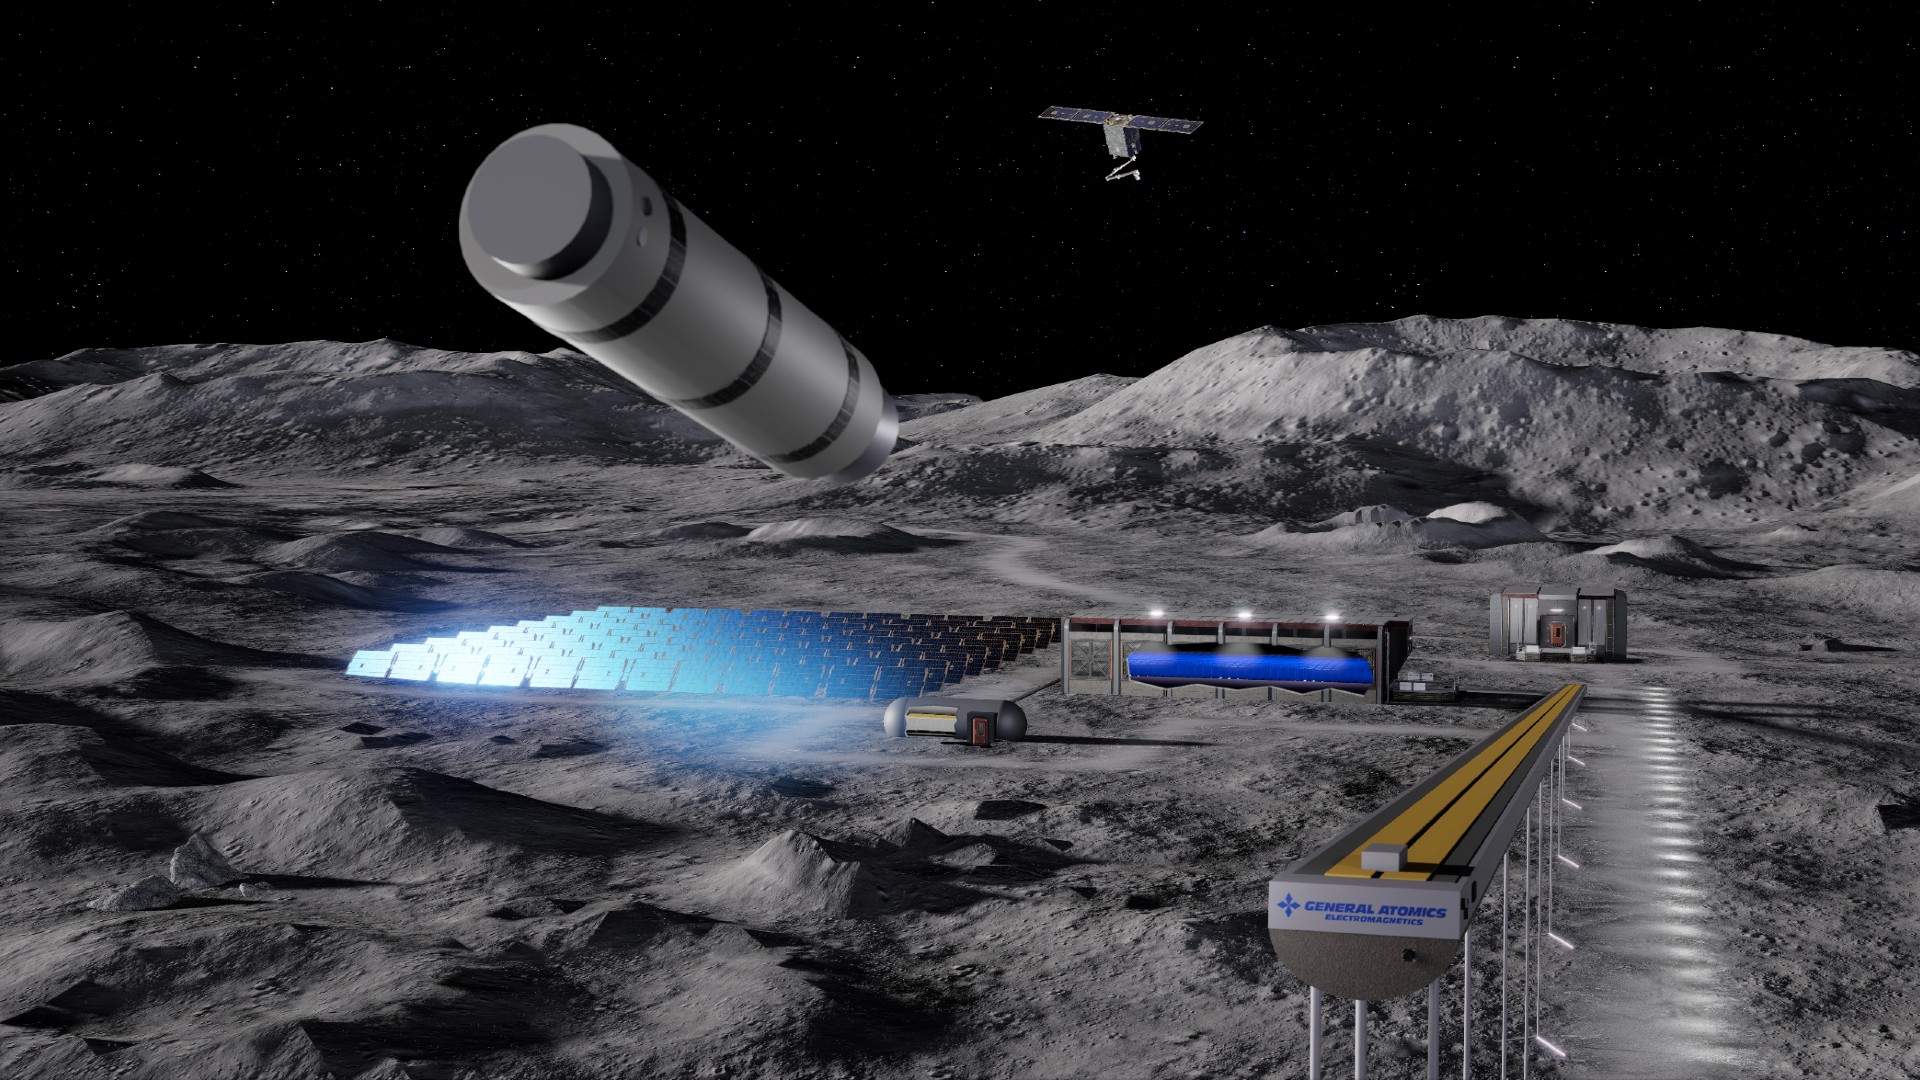 Could we launch resources from the moon with electromagnetic railguns? Space